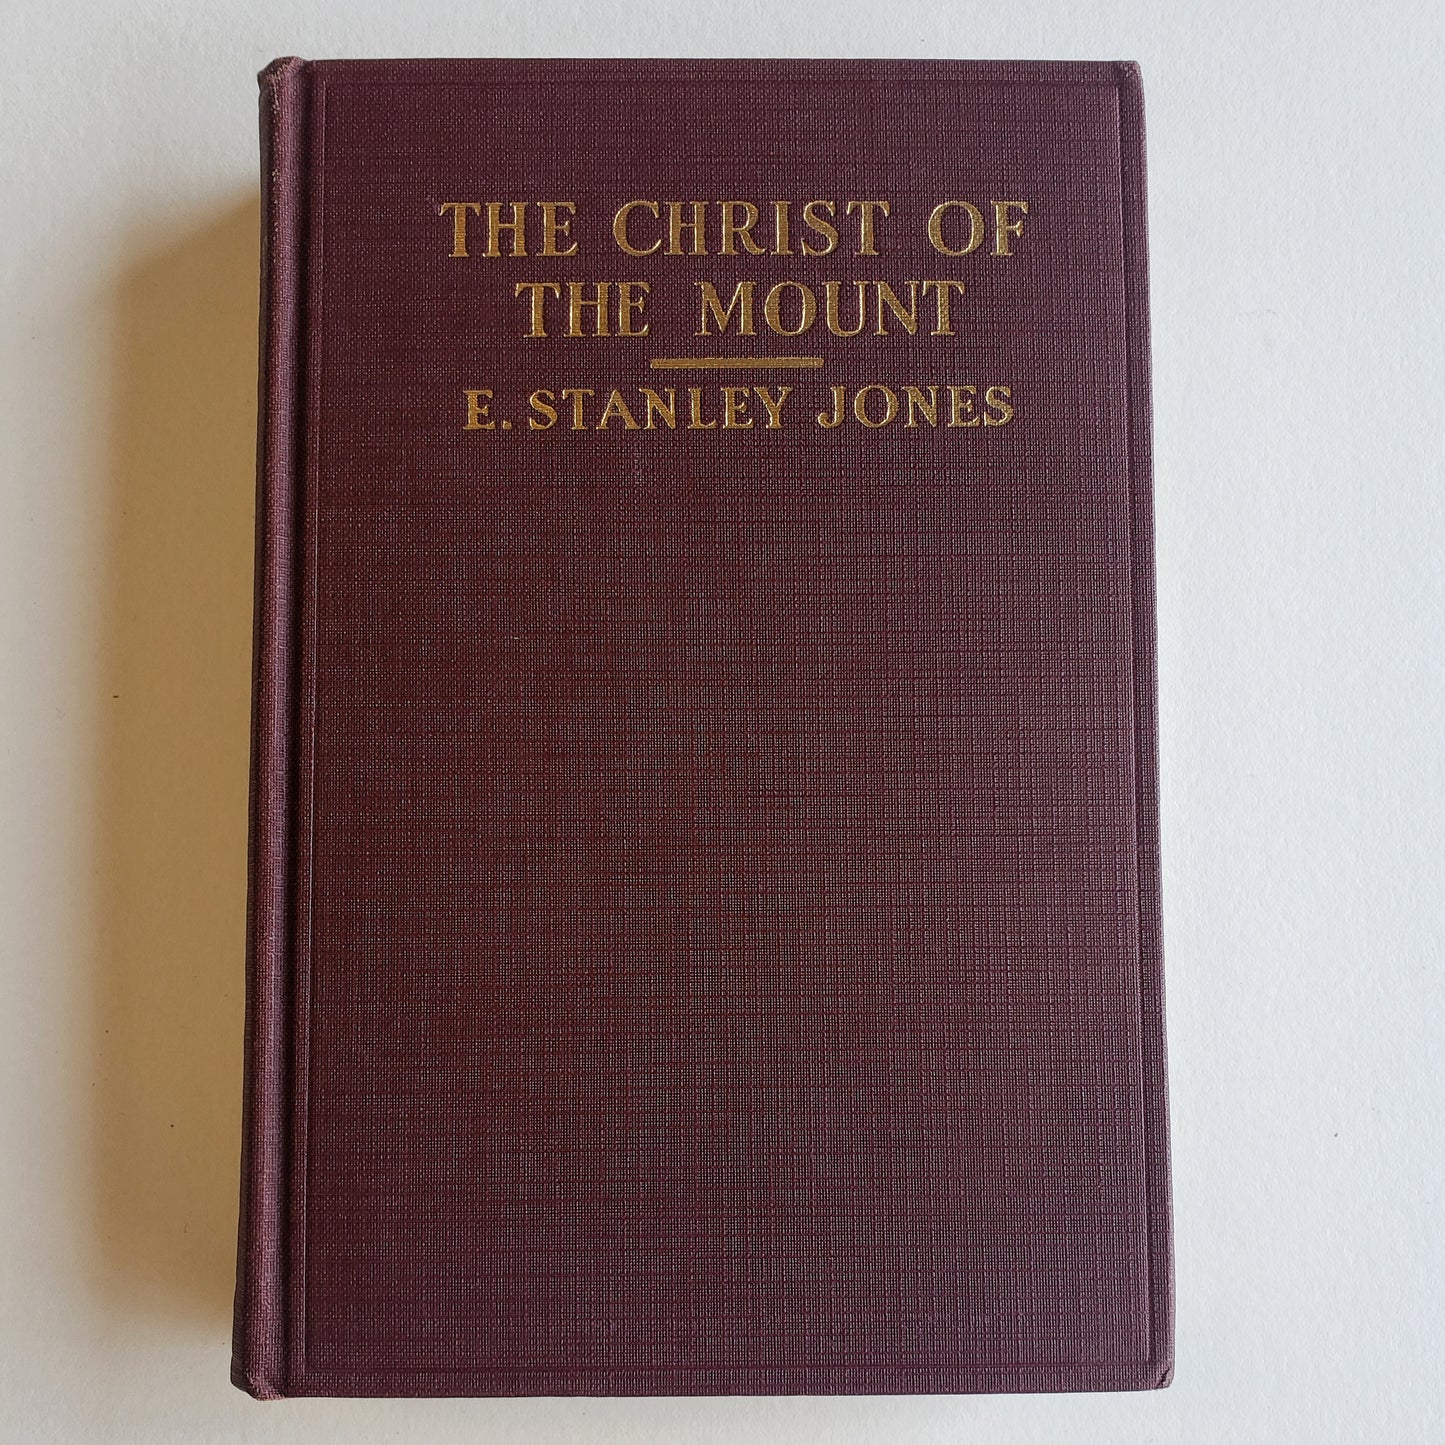 Vintage Book- The Christ of the Mount by E. Stanley Jones (Religion)